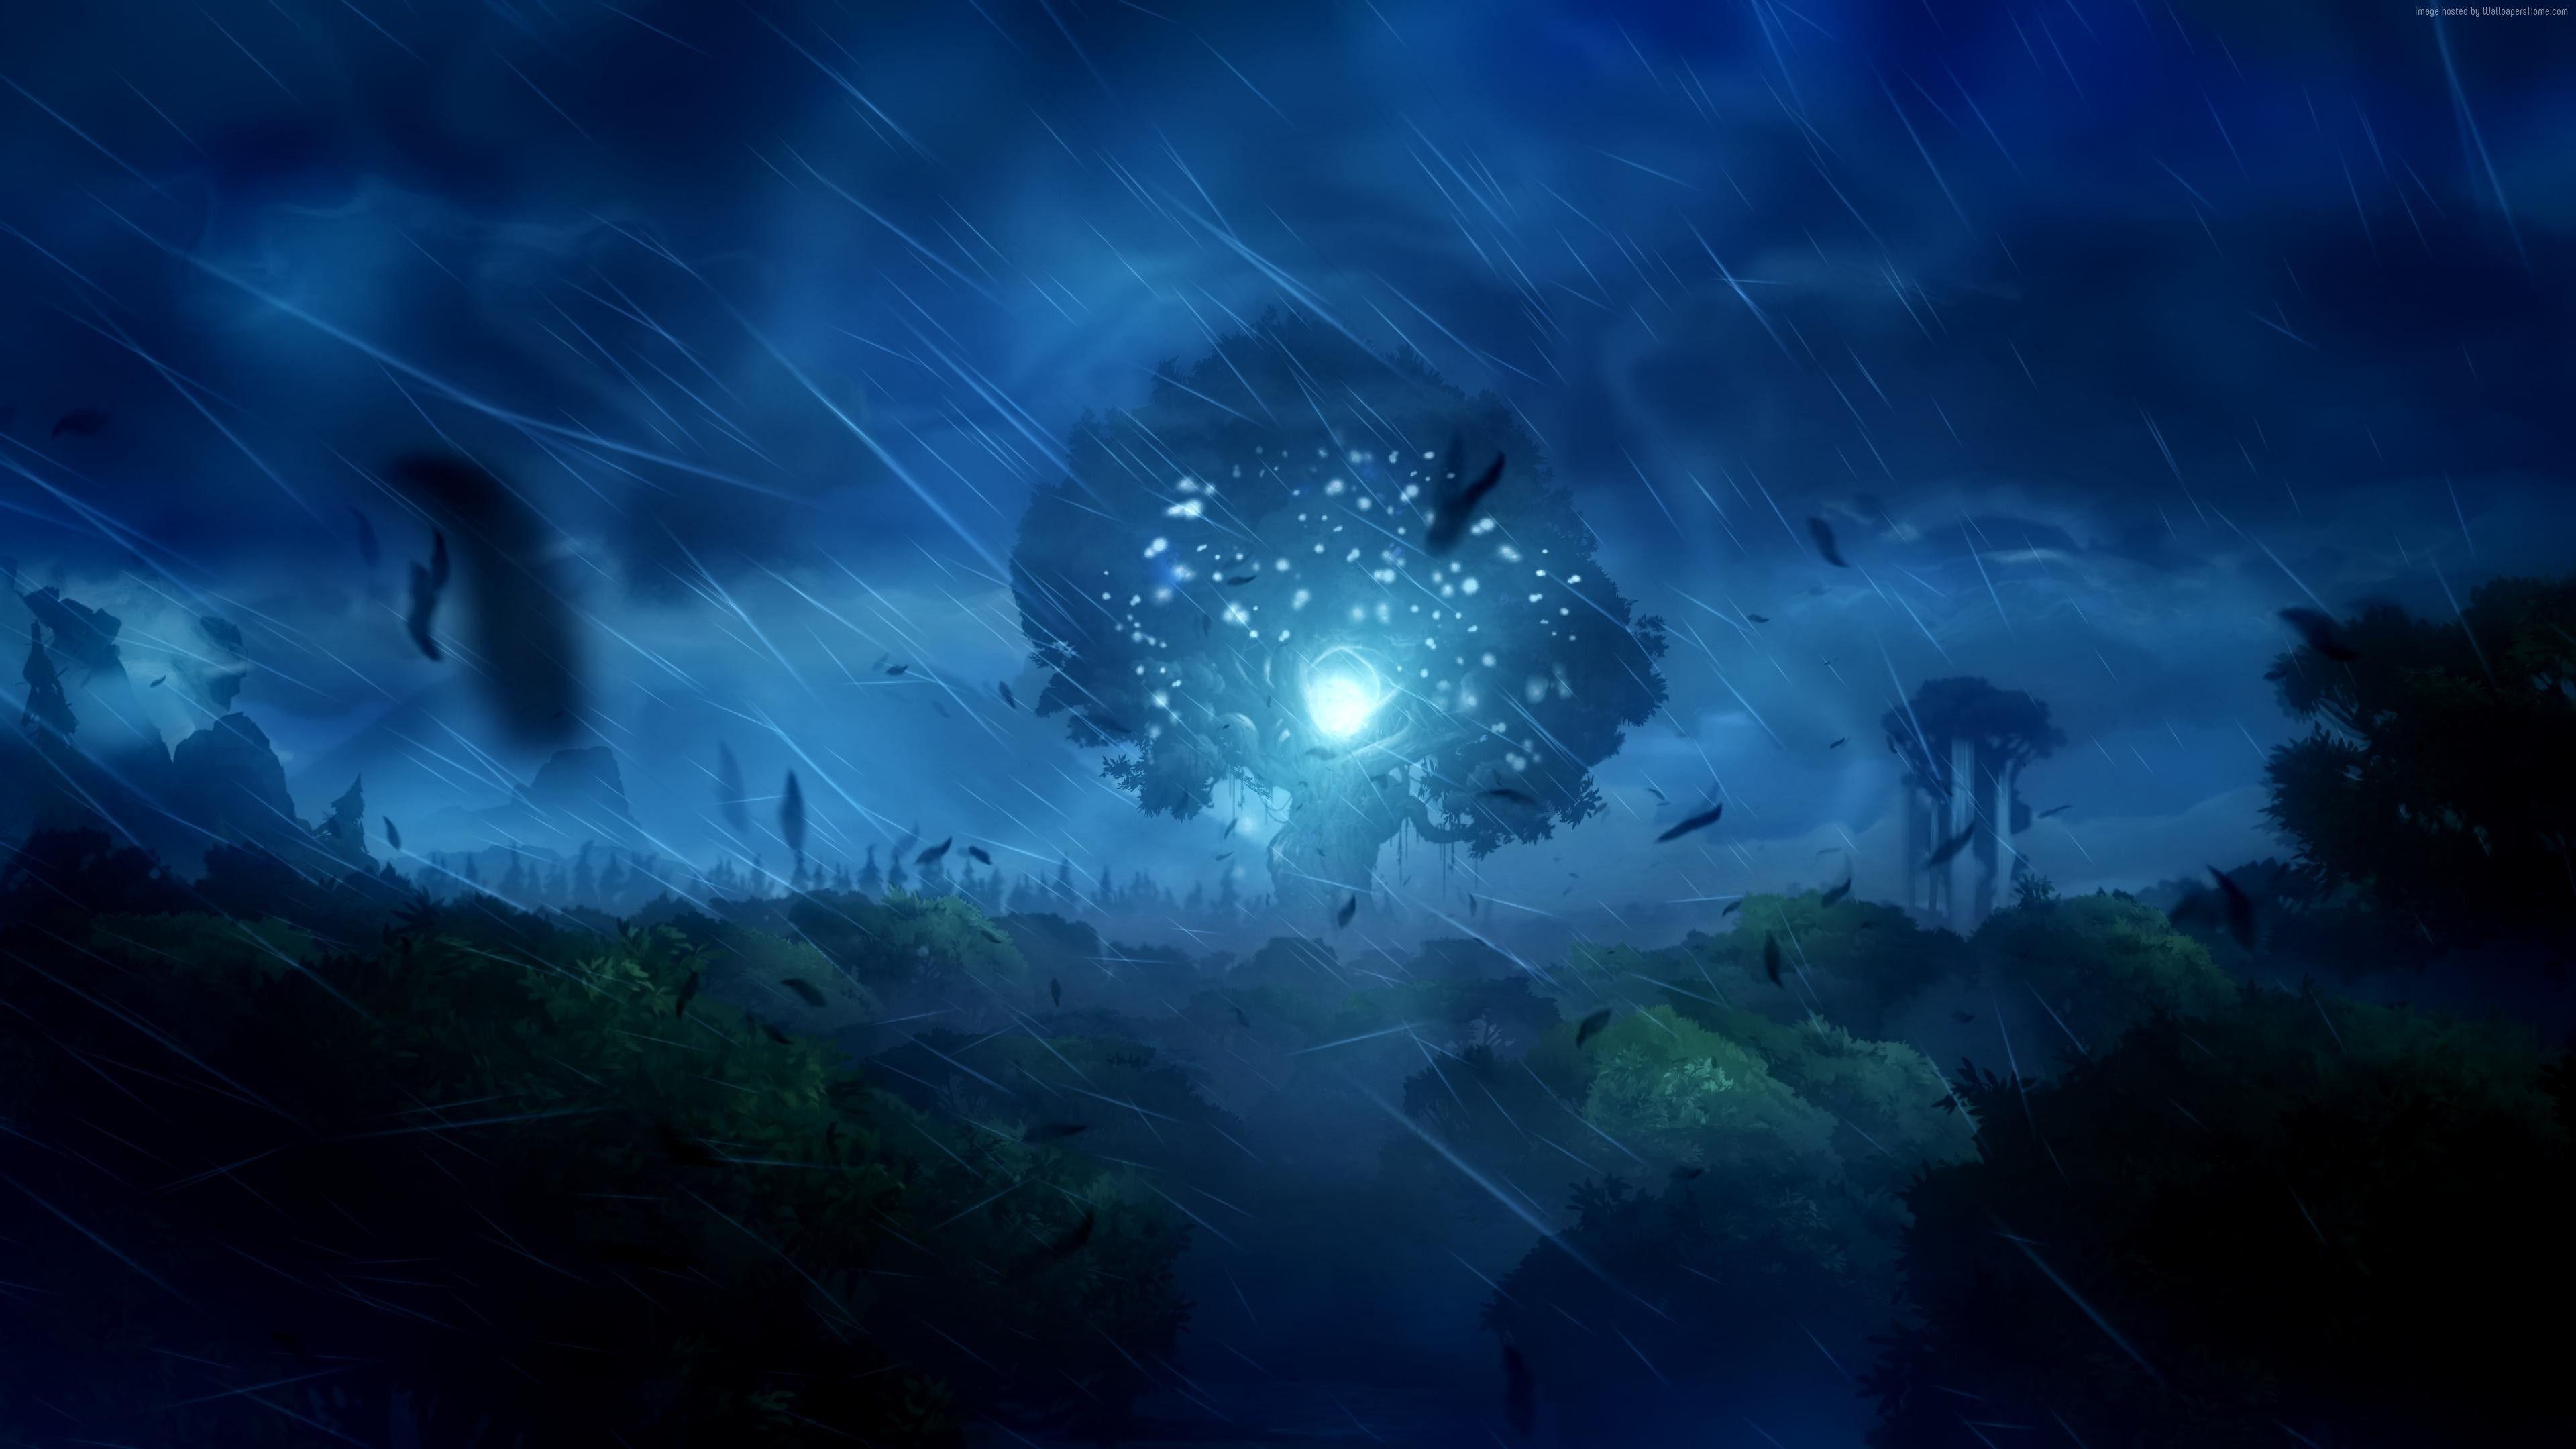 Wallpaper Ori And The Blind Forest Download 3 Image